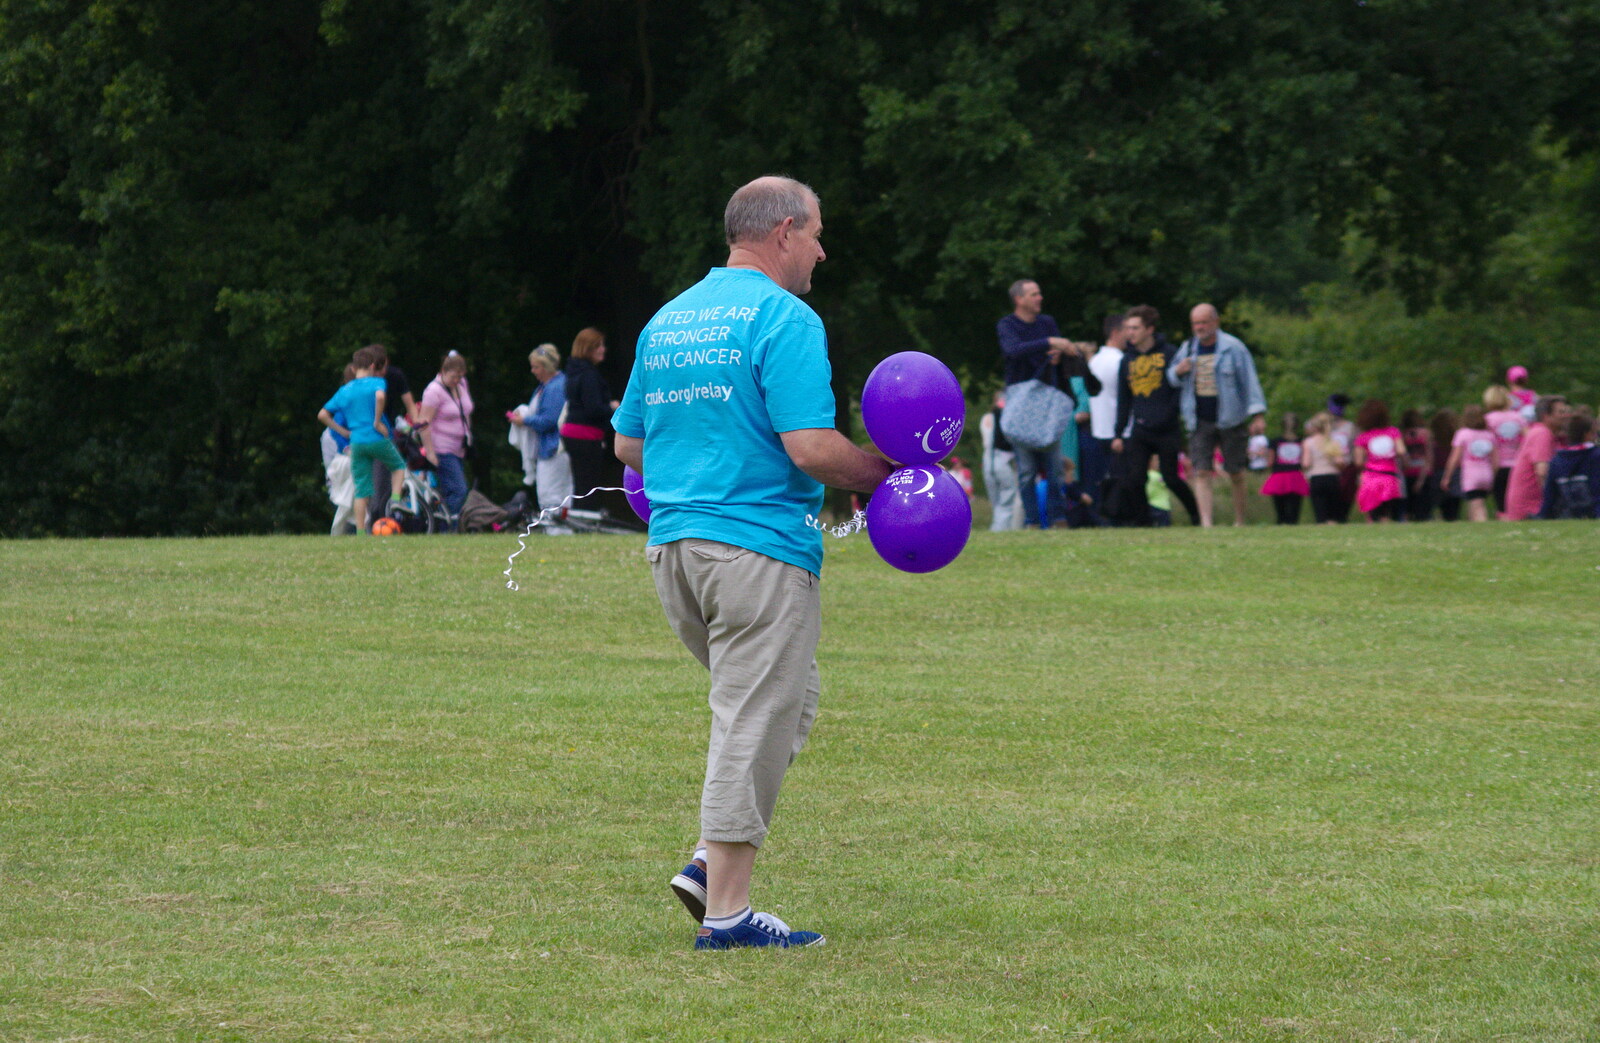 A bloke roams around with balloons from Isobel's Race For Life, Chantry Park, Ipswich - 11th June 2014